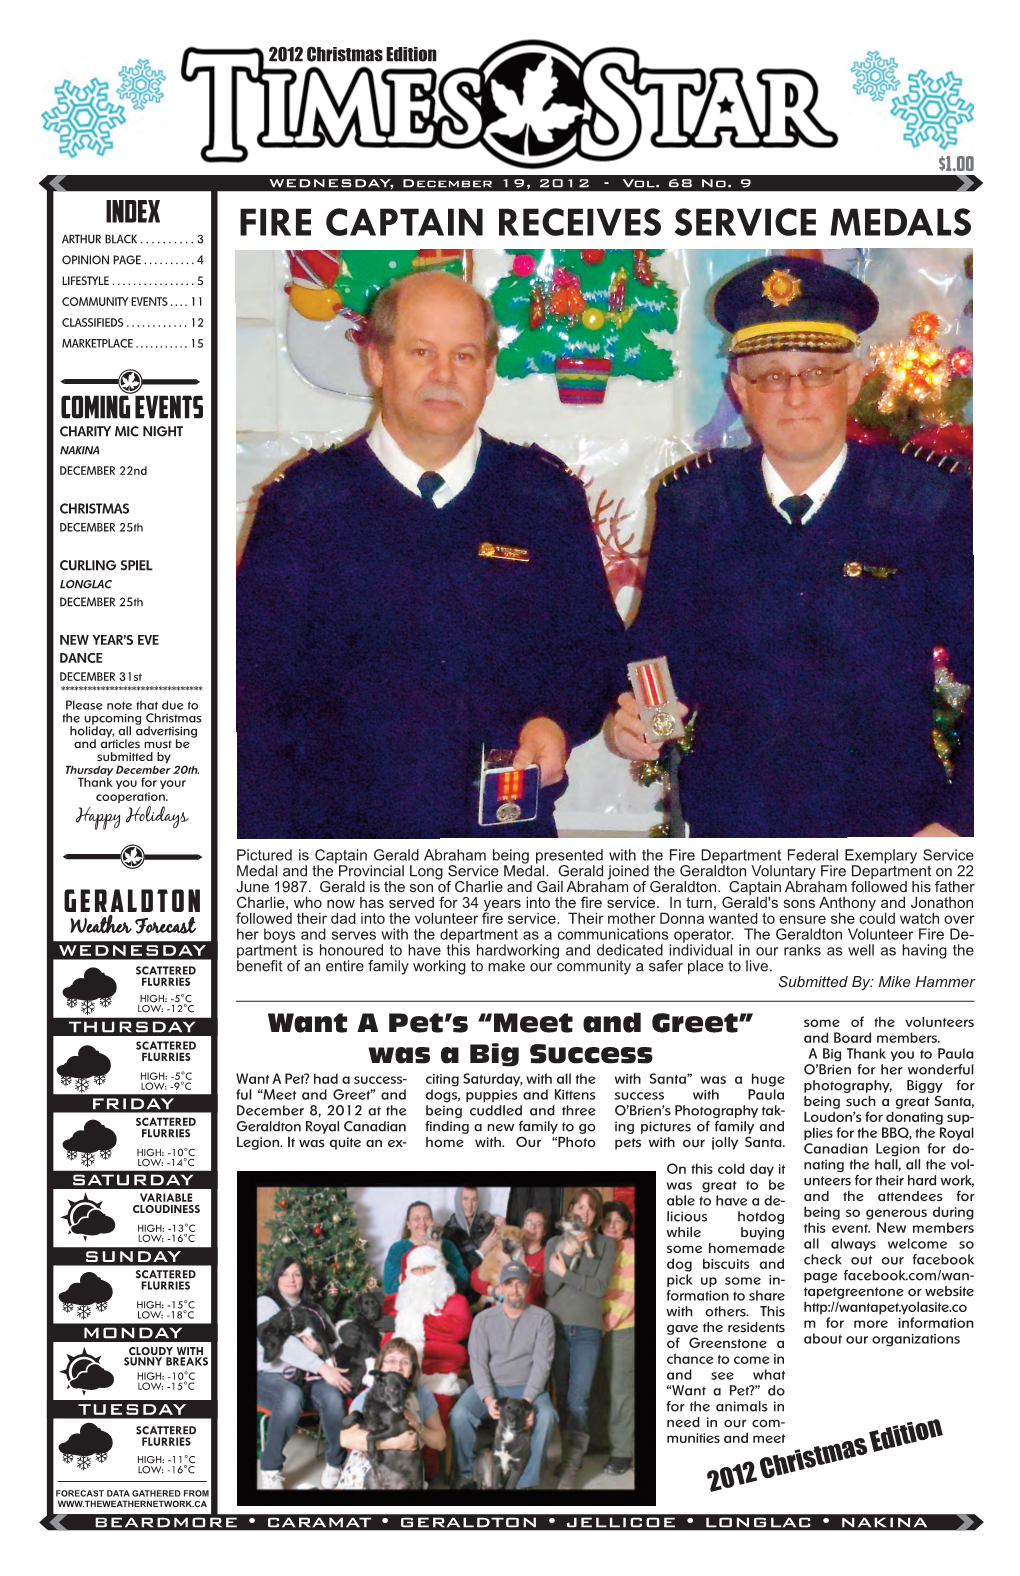 Fire Captain Receives Service Medals Opinion Page